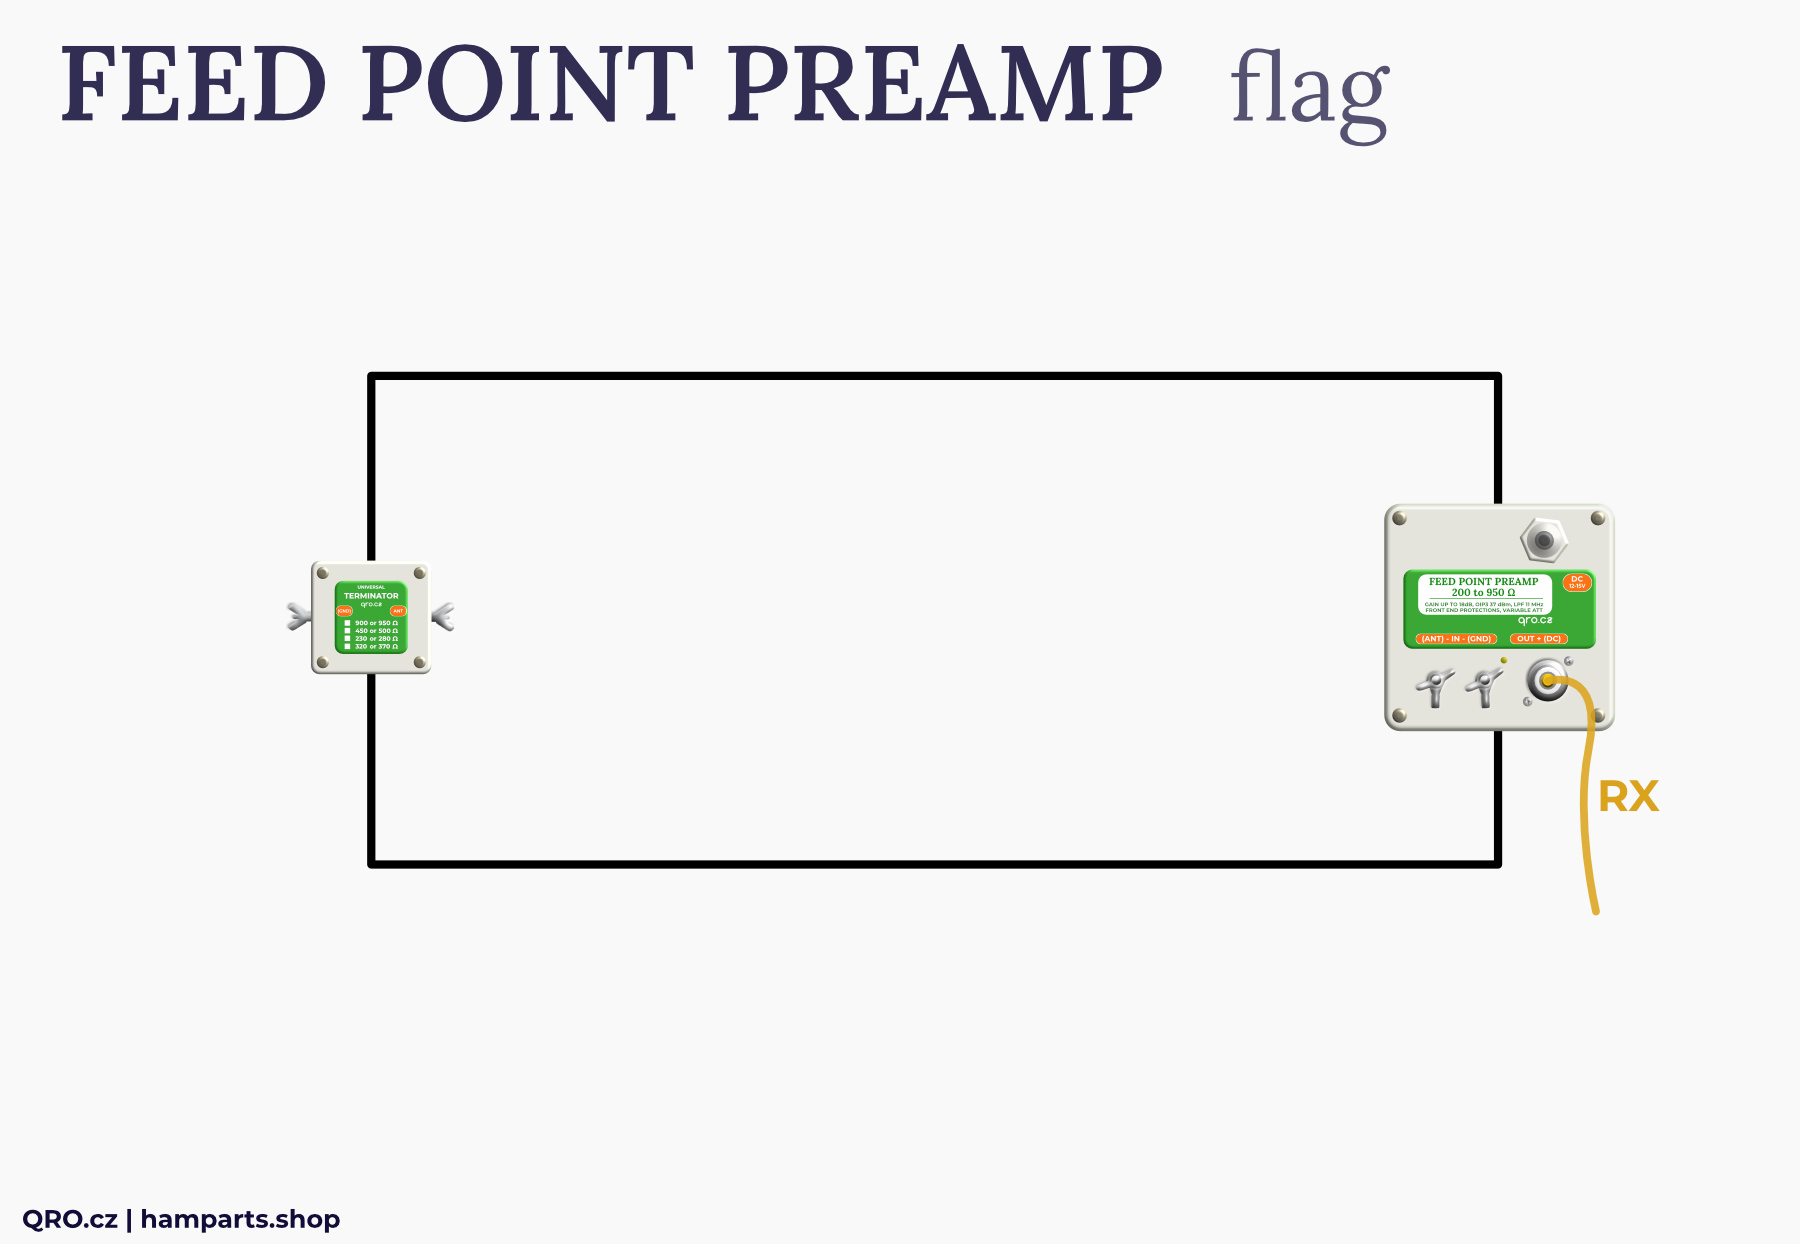 feed point preamp box with universal terminator flag rx antenna by qro.cz hamparts.shop